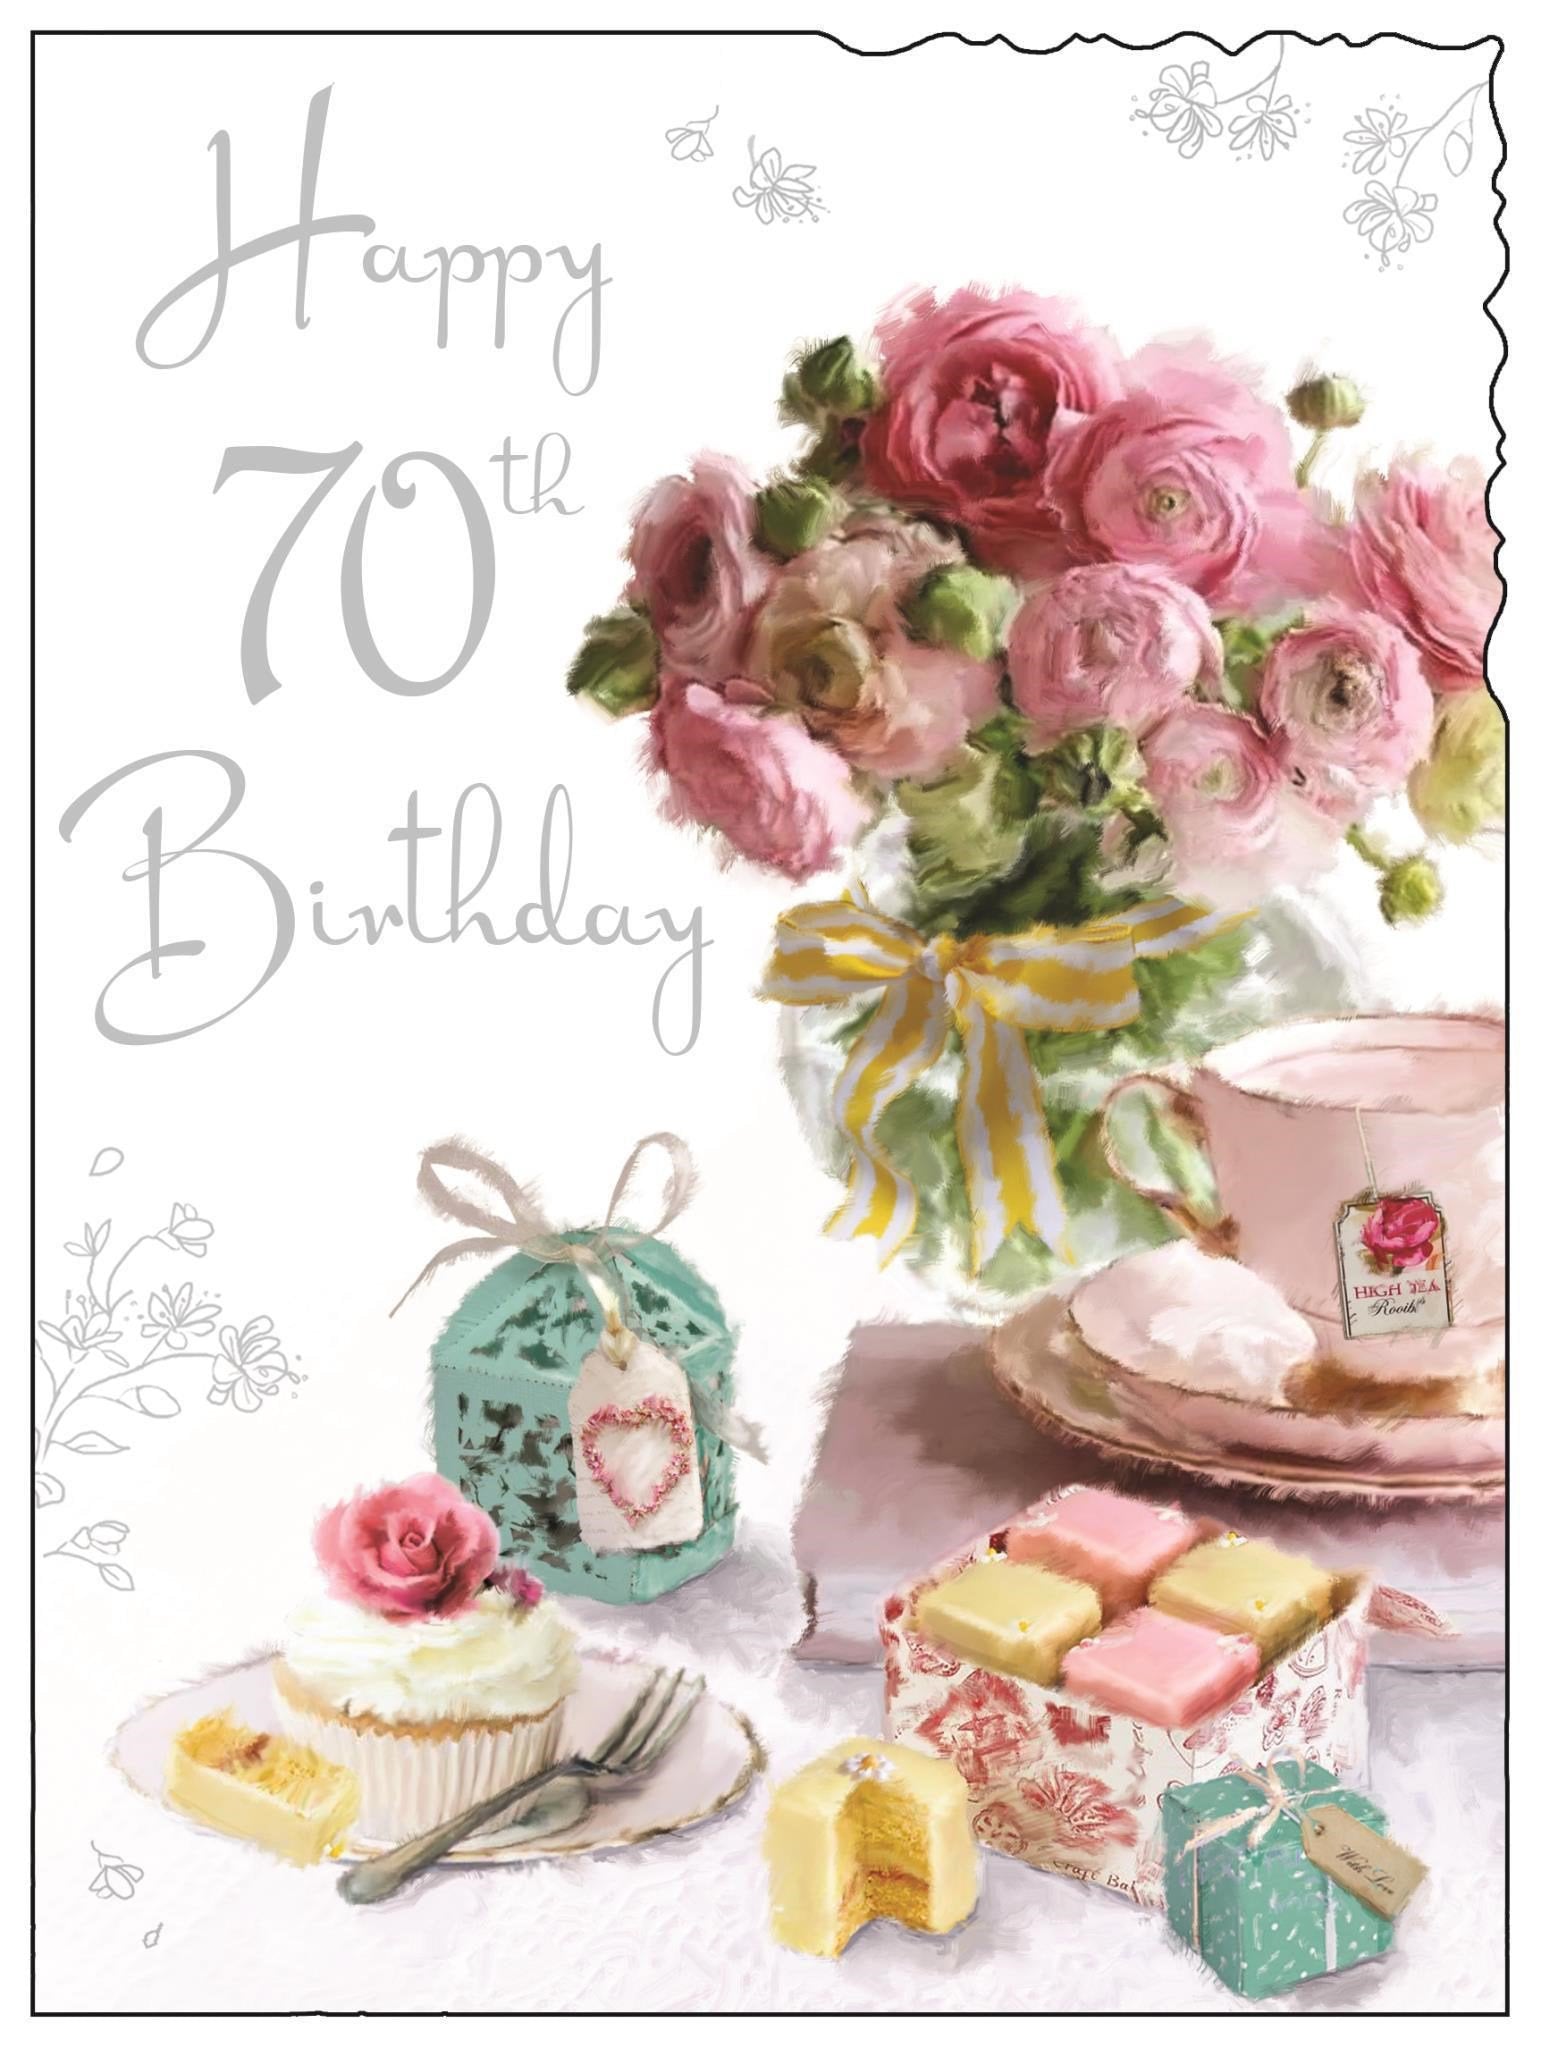 Front of 70th Birthday Cakes Flowers Greetings Card